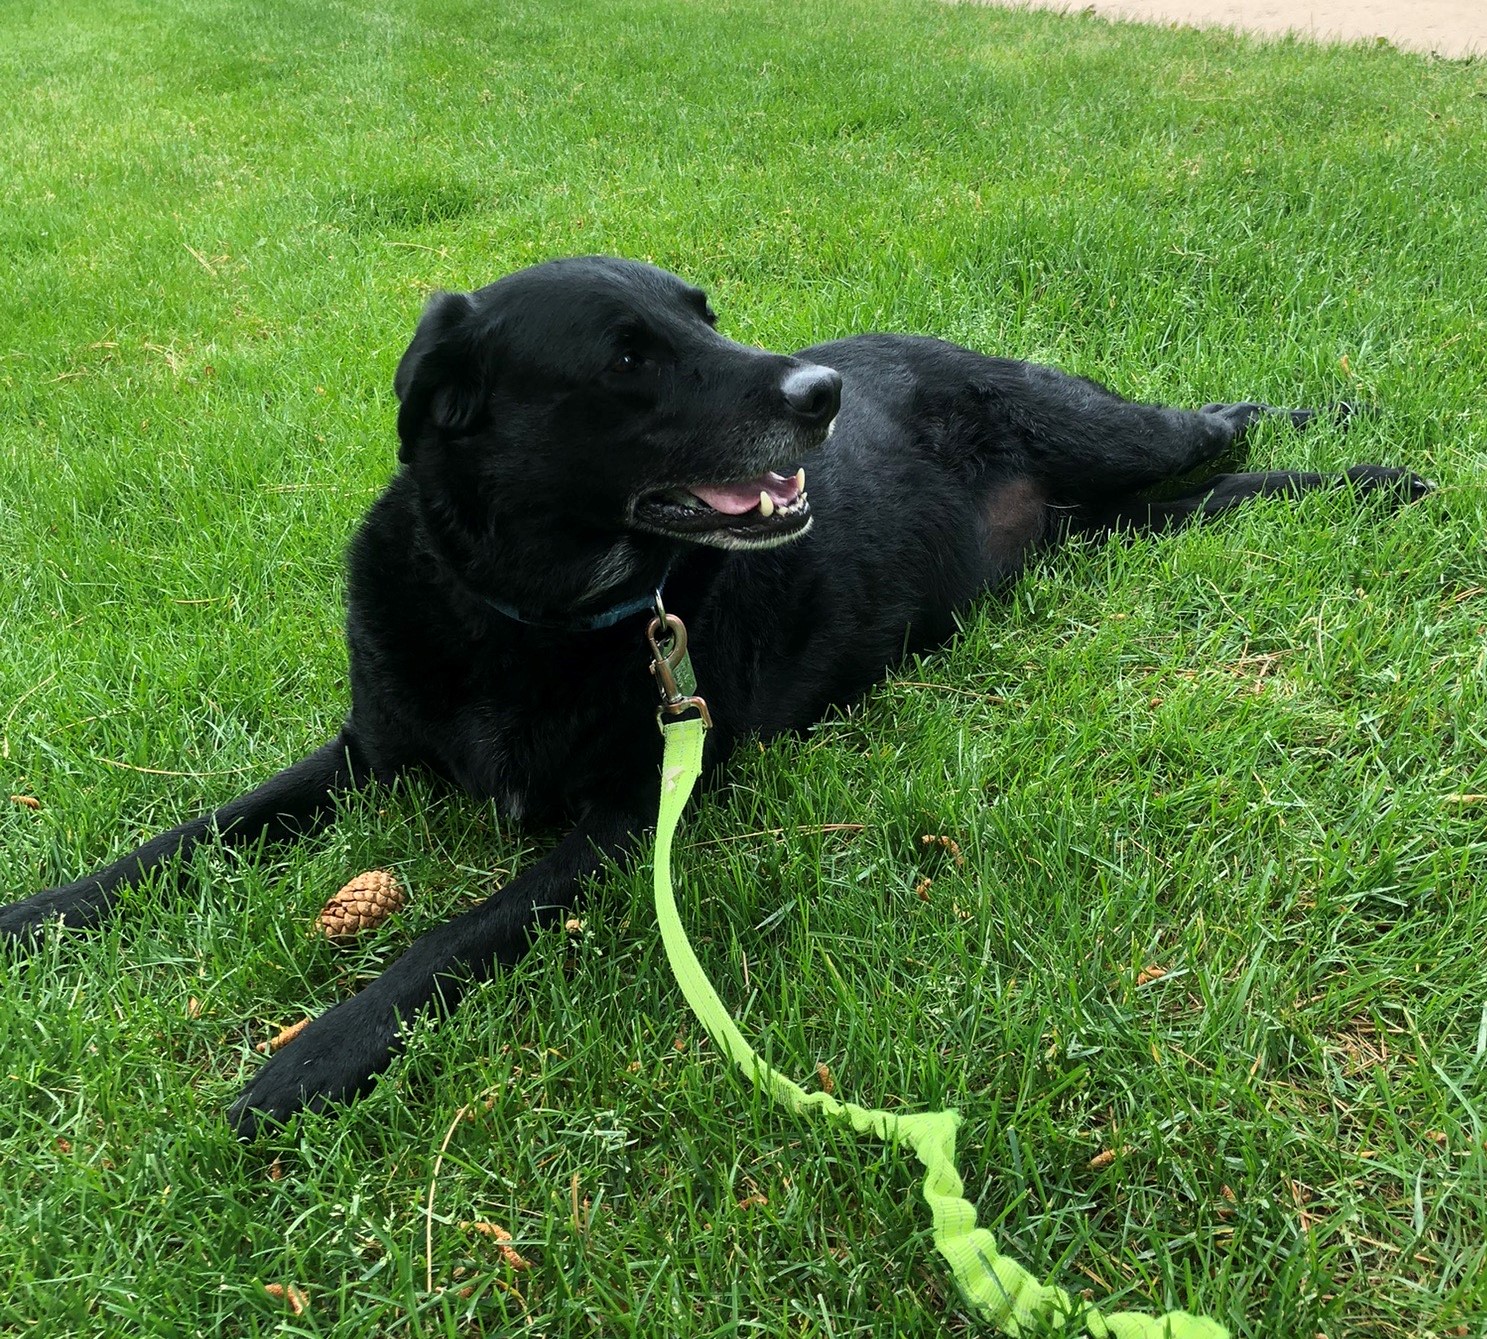 Photo of Bowie, a black Labrador who is stretched out and relaxing in the green grass following a walk.